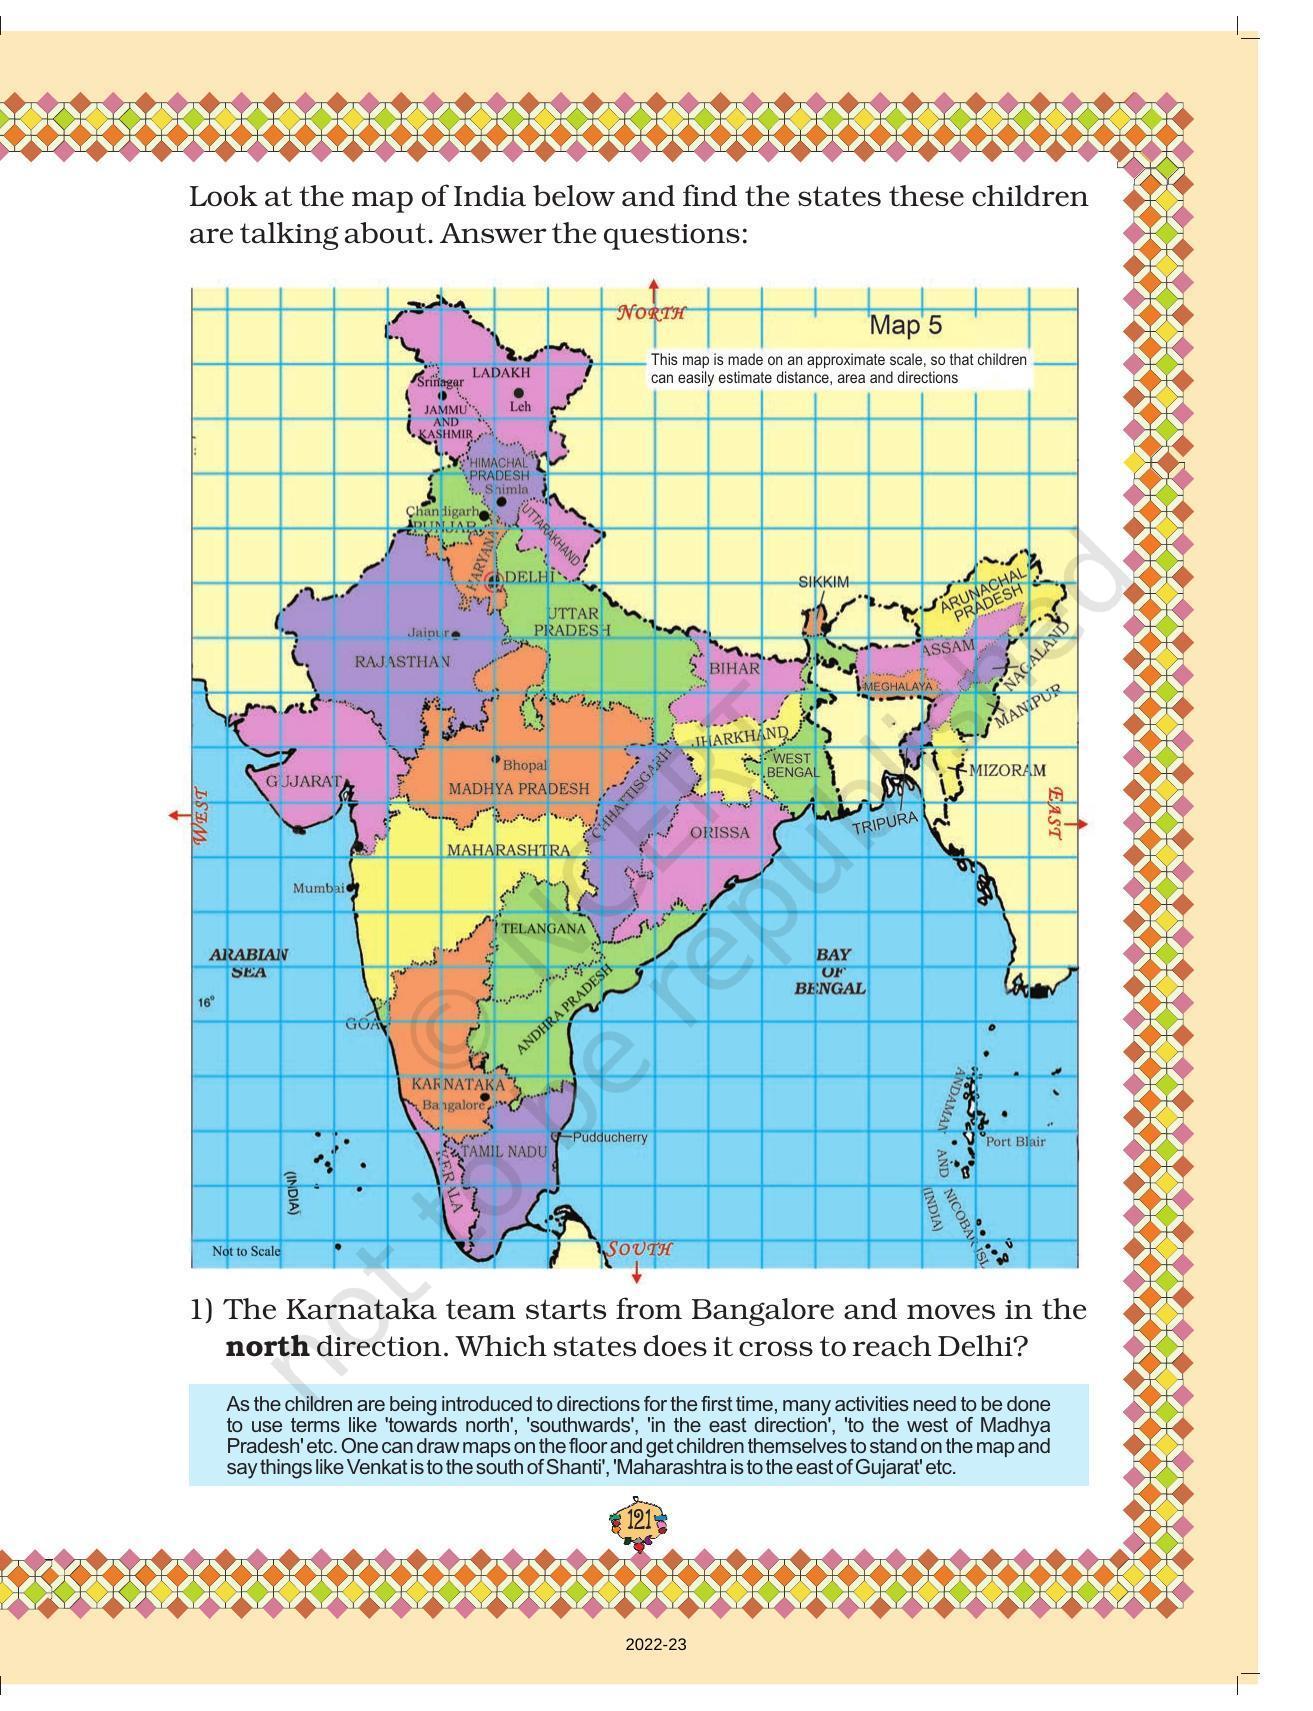 NCERT Book for Class 5 Maths Chapter 8 Mapping Your Way - Page 10